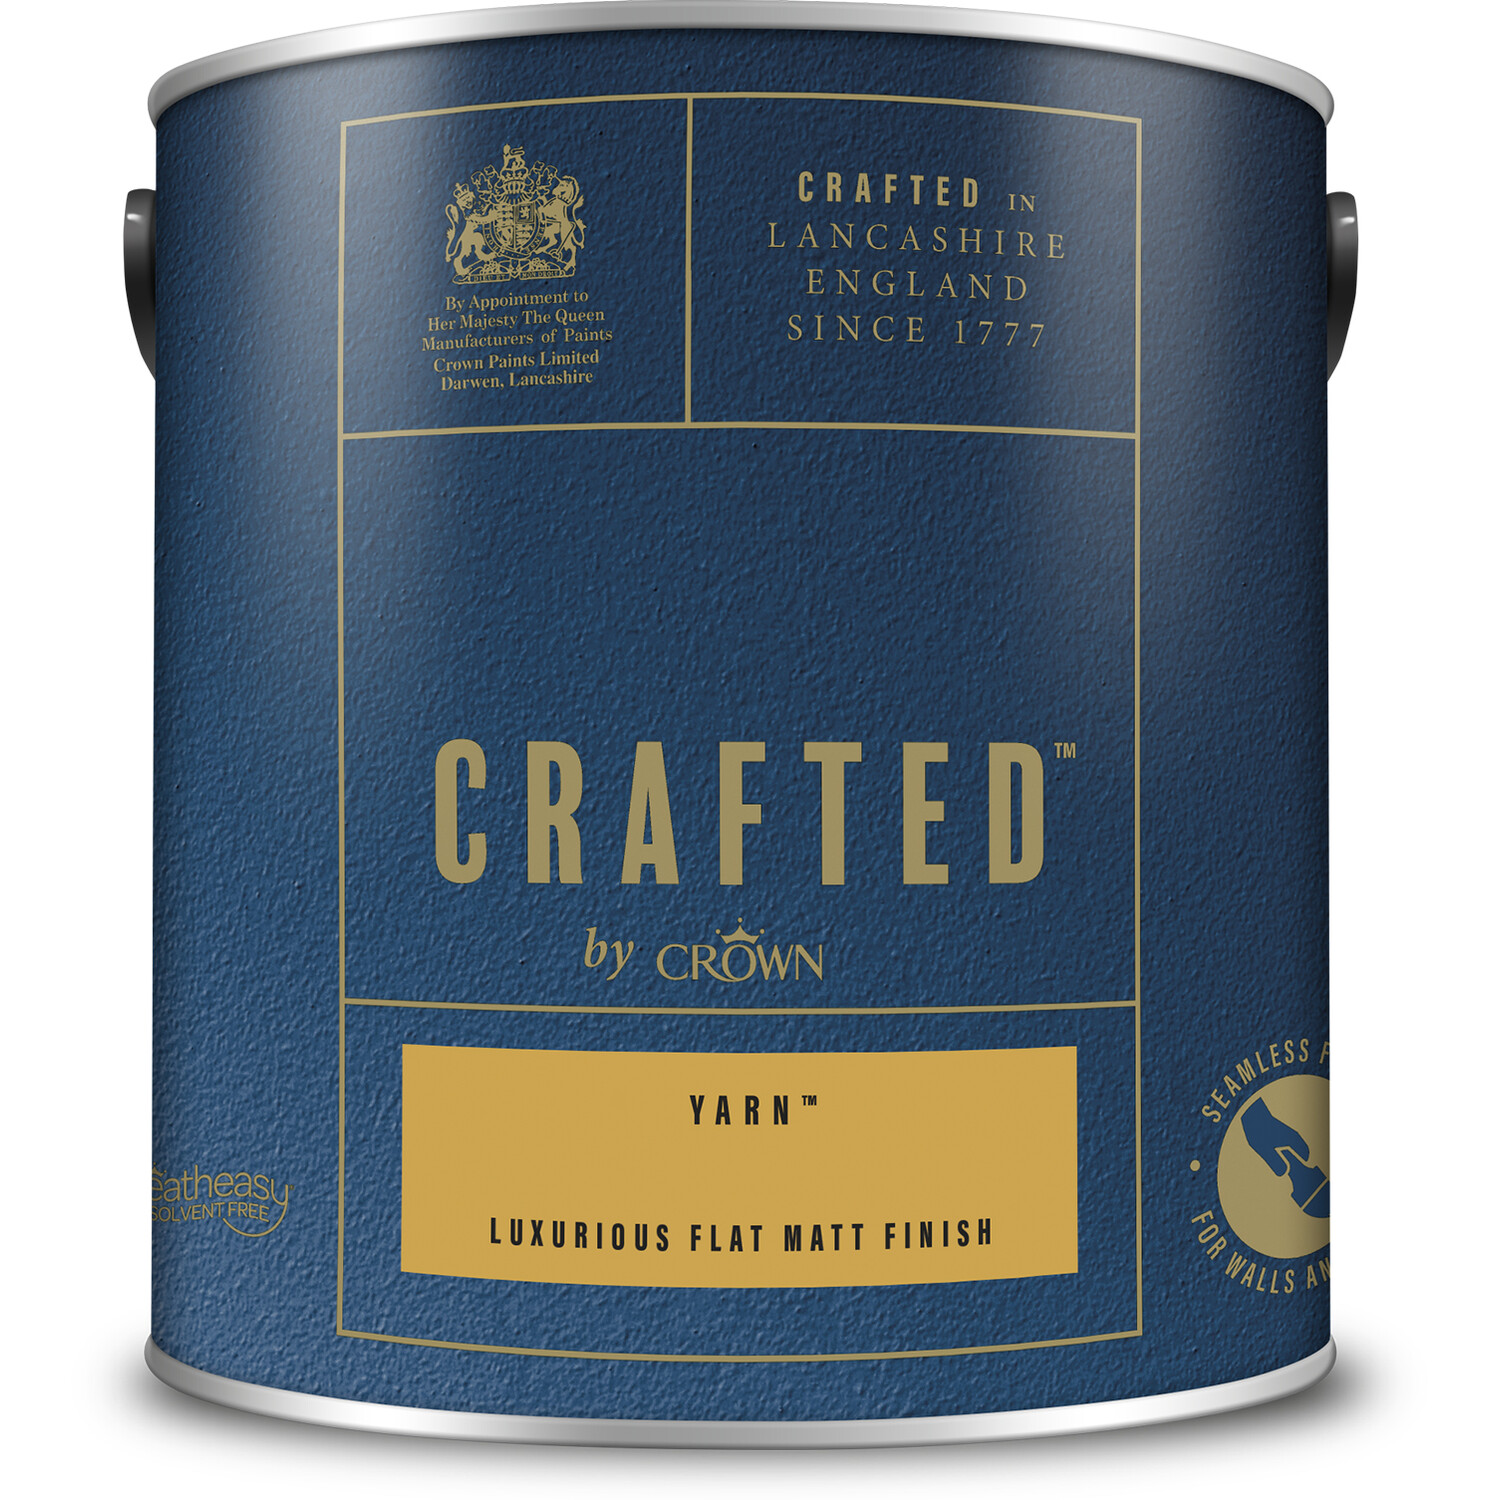 Crown Crafted Walls and Wood Yarn Luxurious Flat Matt Paint 2.5L Image 2